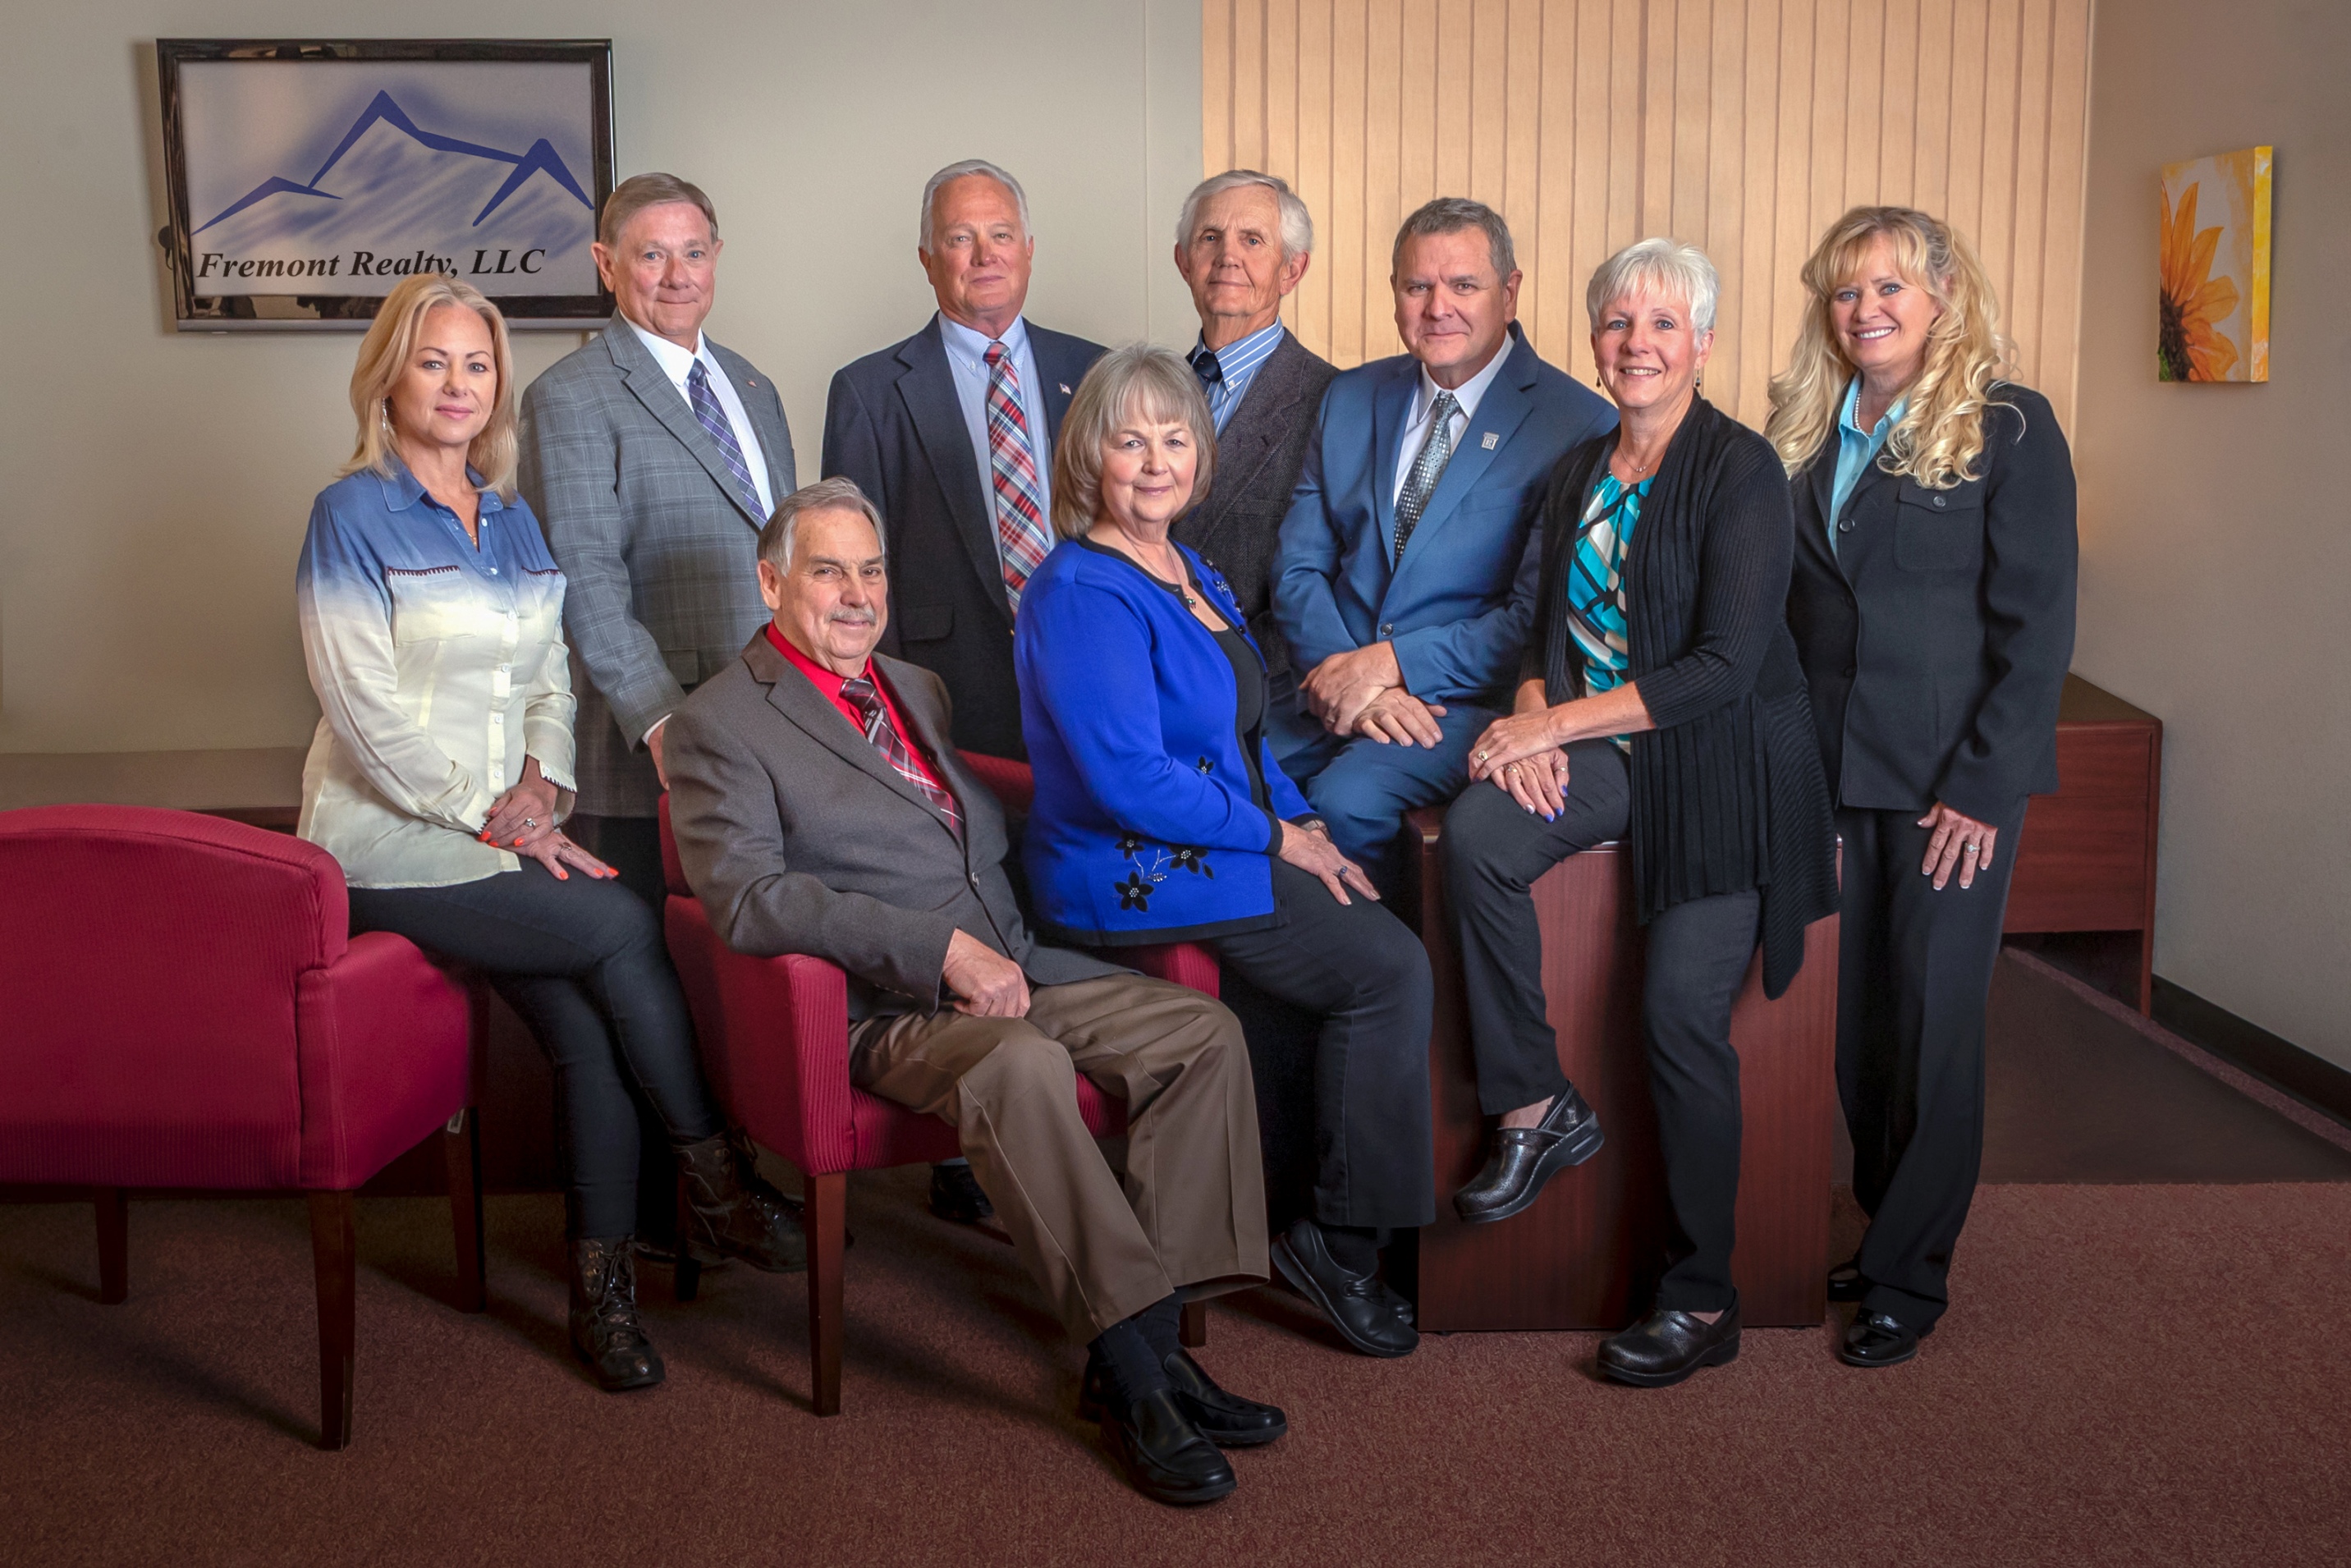 The Fremont Realty Team